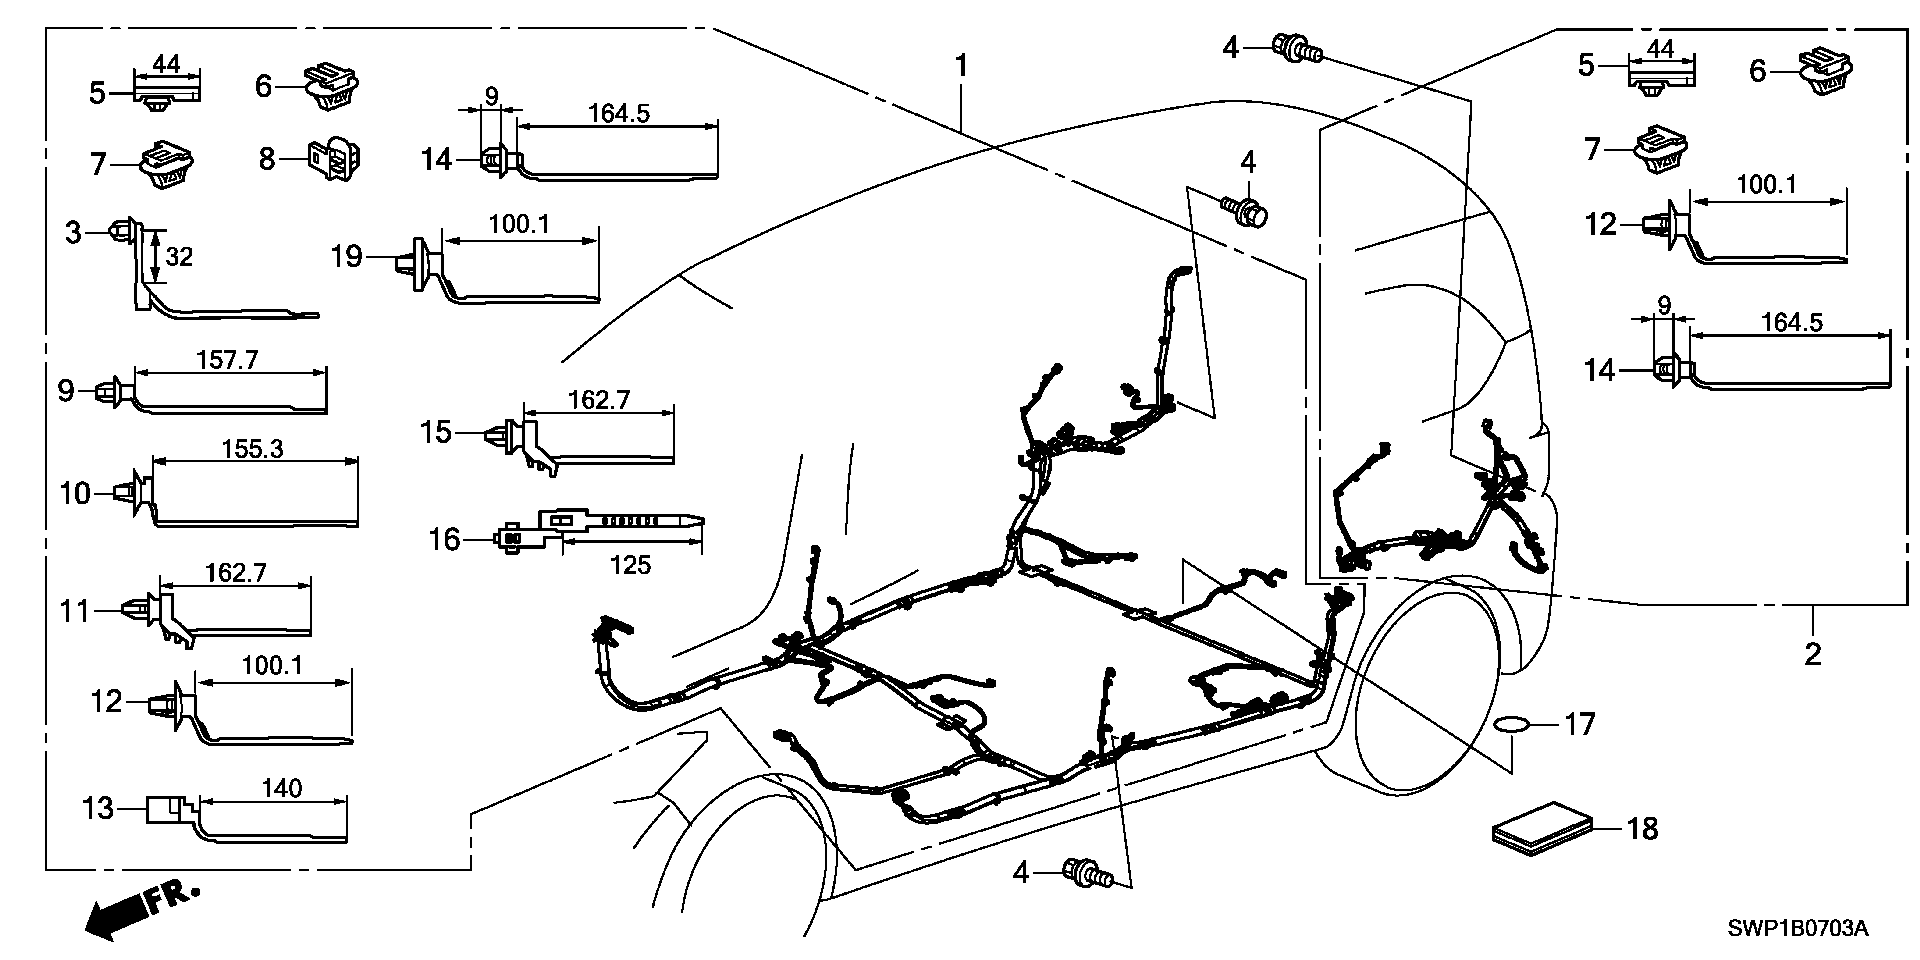 WIRE HARNESS(4)